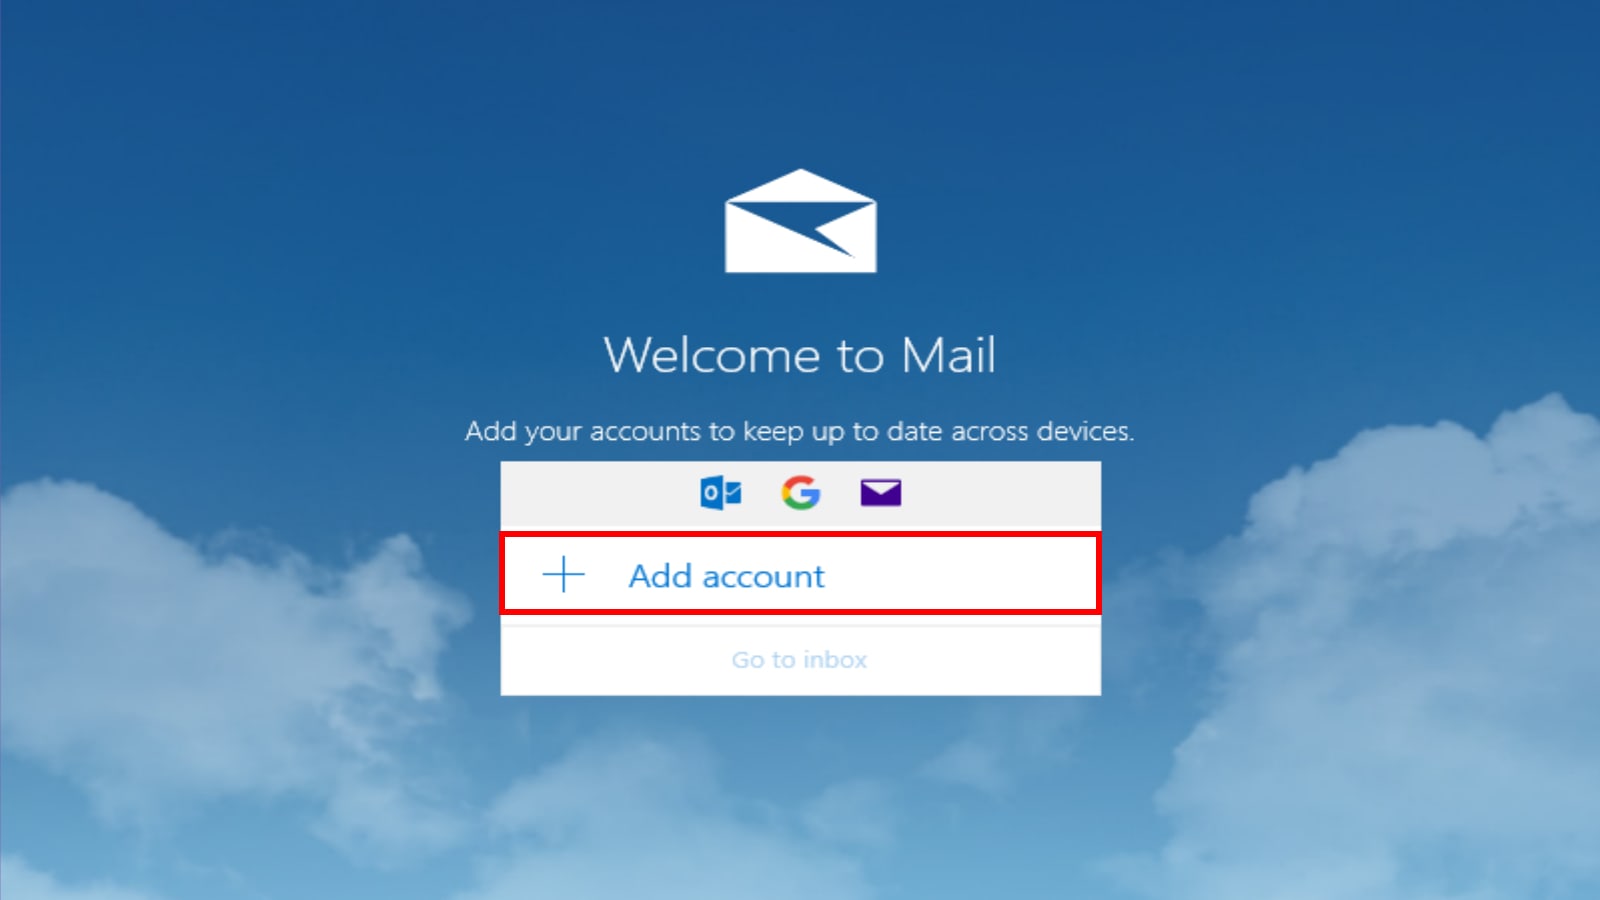 Windows 10 Welcome to Mail